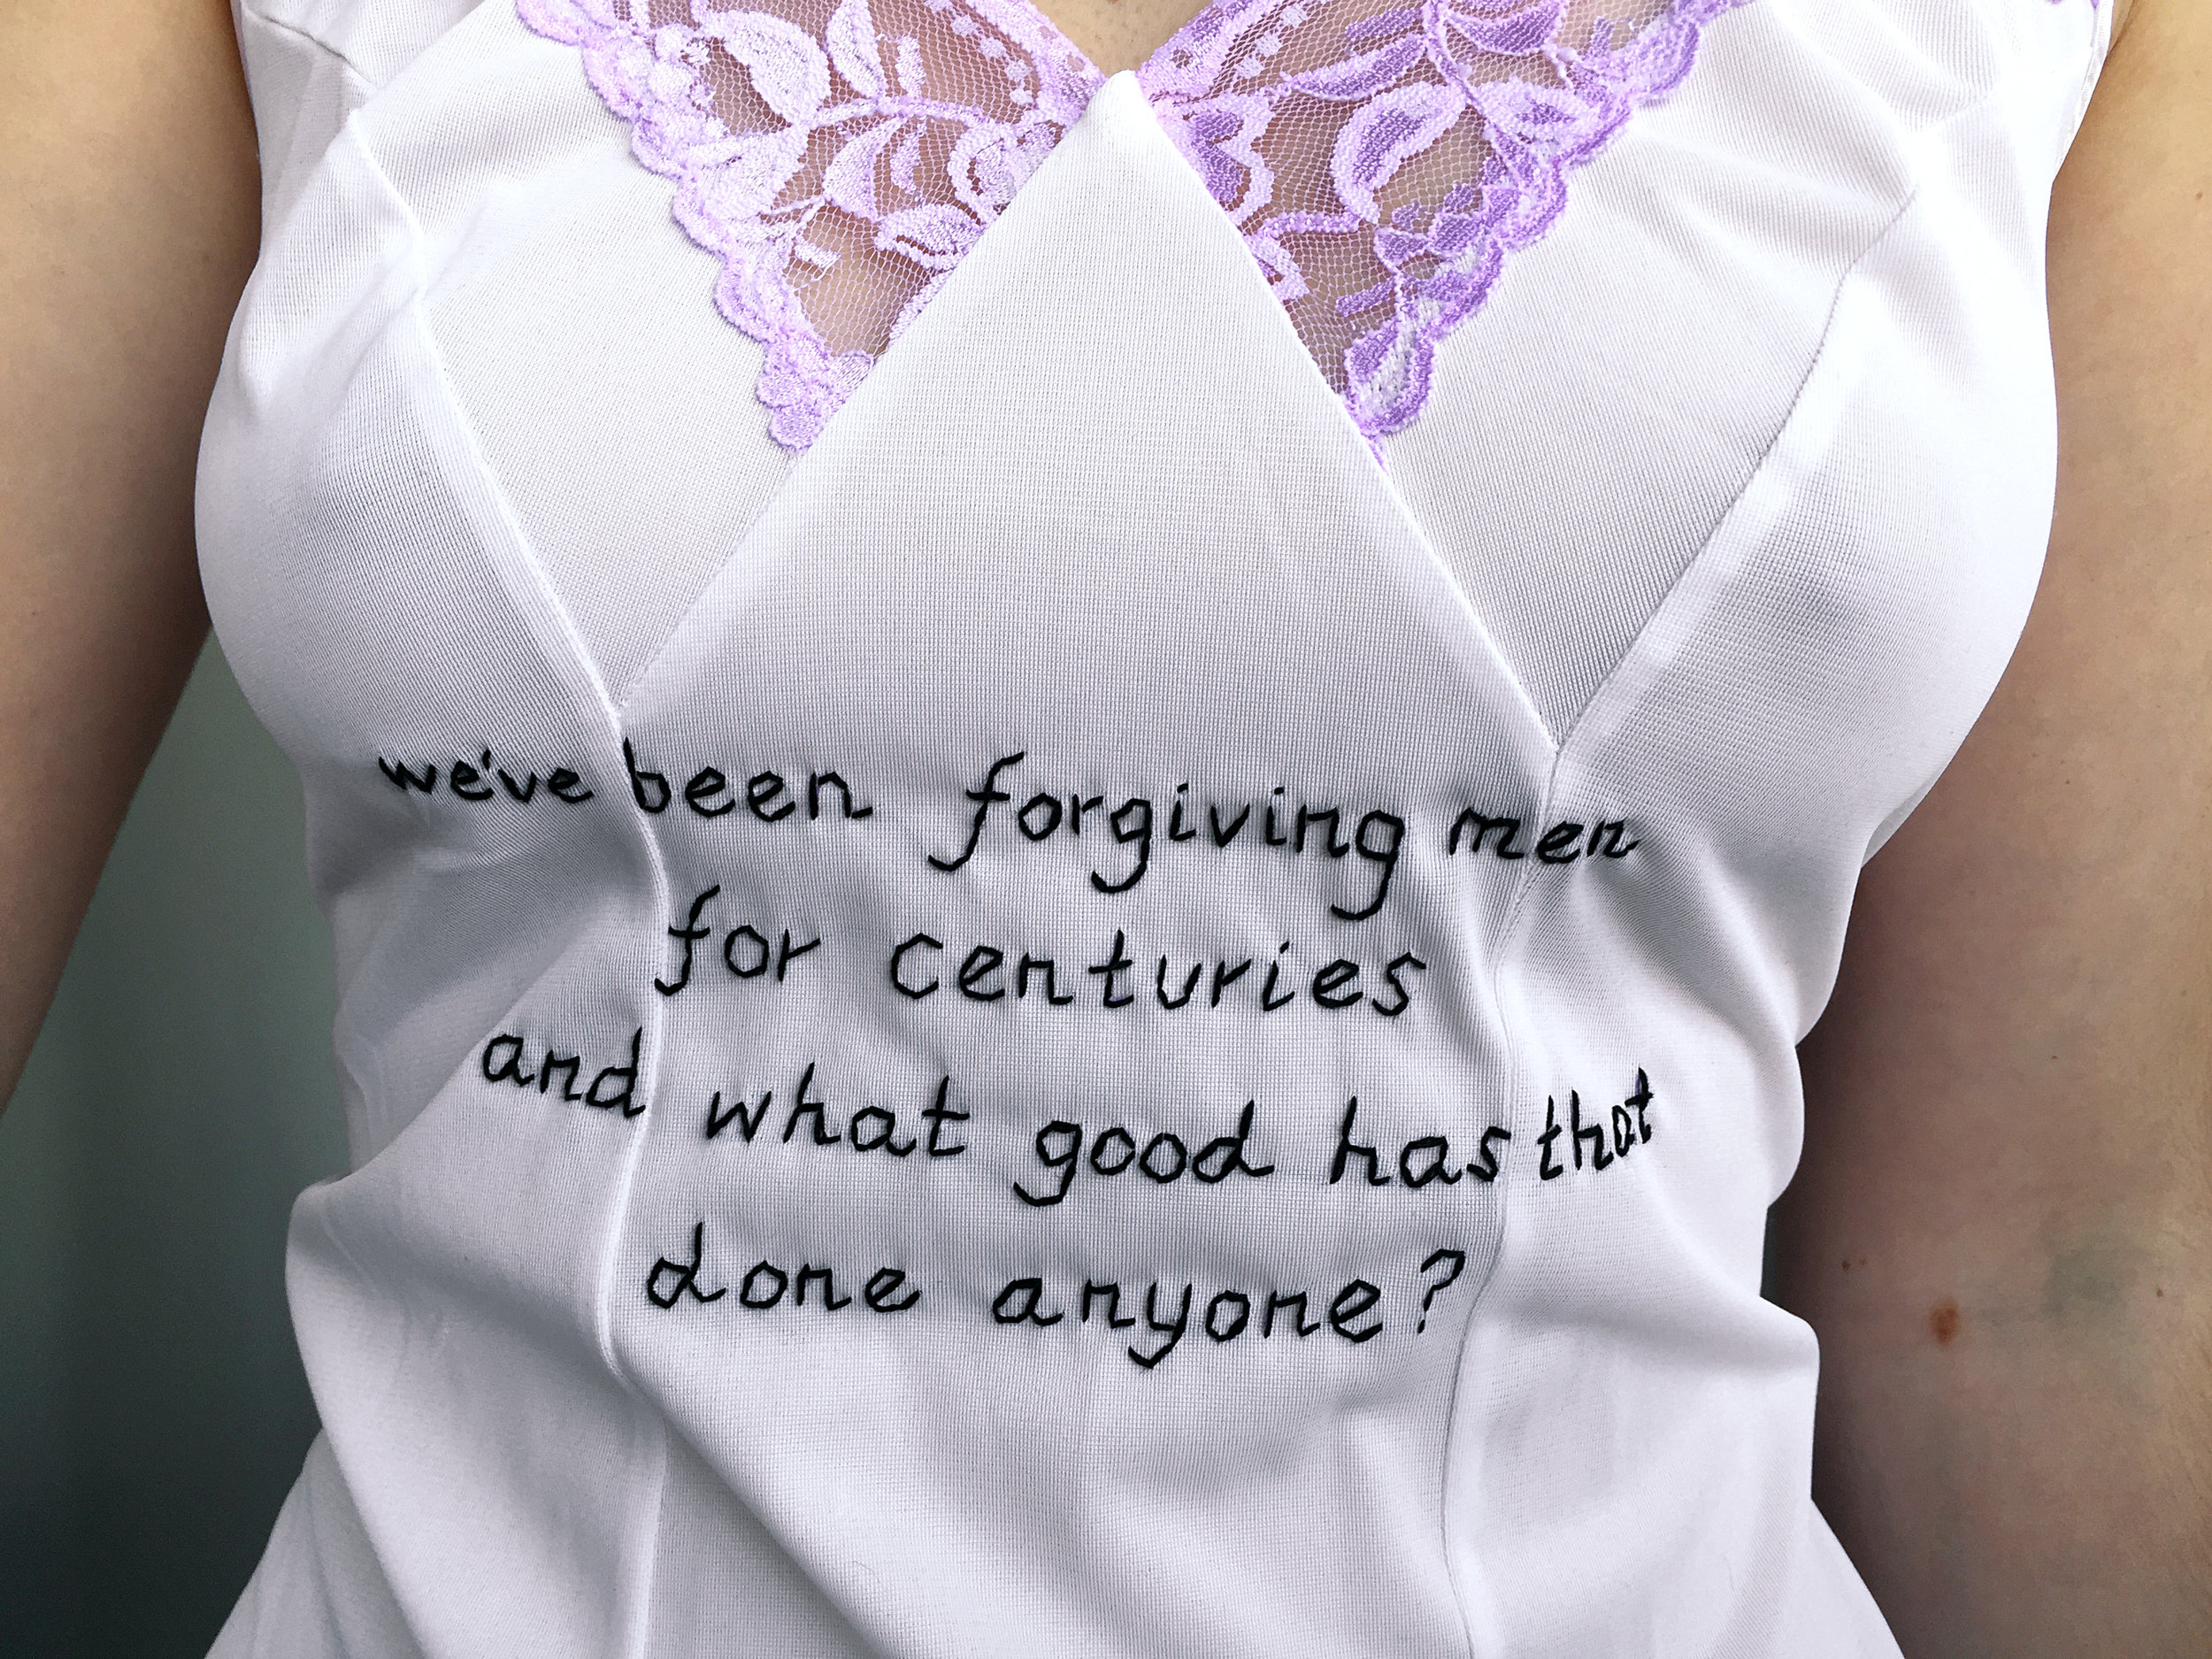 embroidered "we've been forgiving men for centuries and what good has that done anyone?" silk nightie, 2018, Sophie King